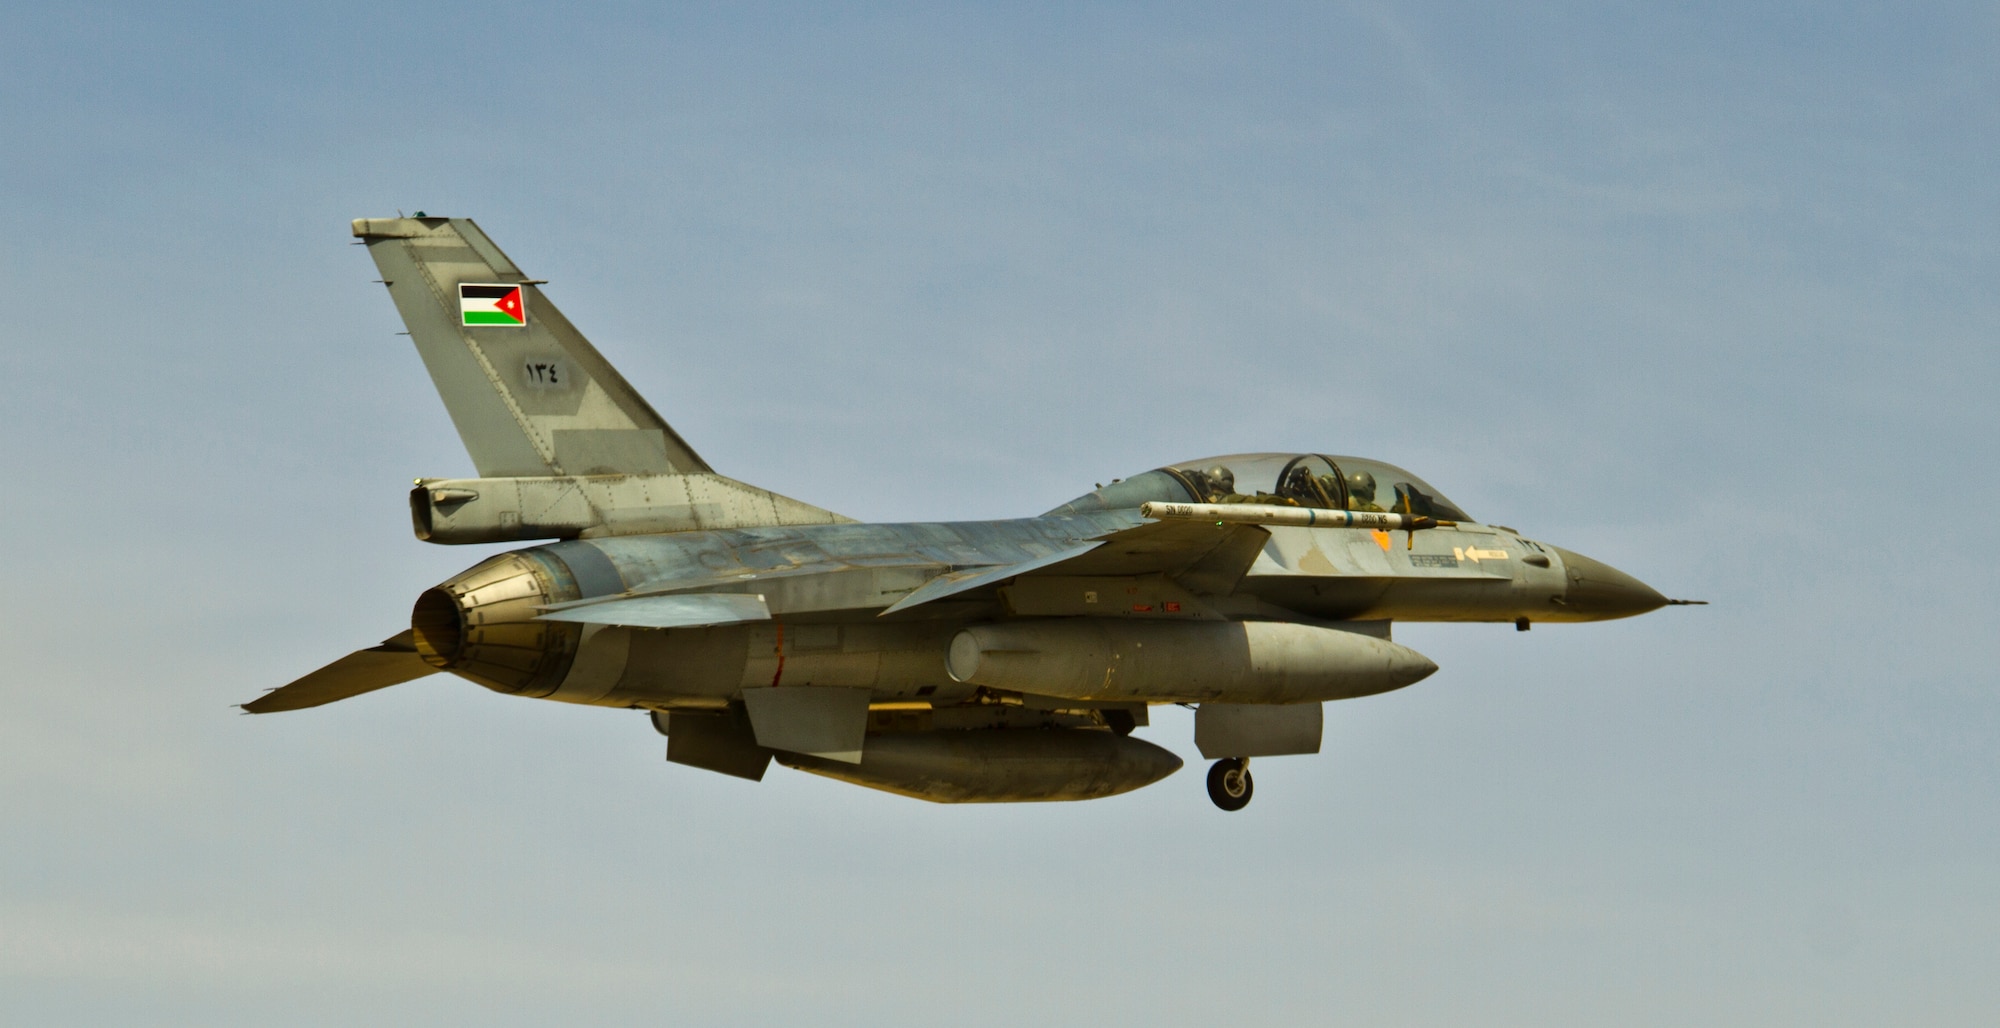 An F-16 Fighting Falcon from the Royal Jordanian Air Force takes to the skies over an air base in northern Jordan May 29, 2014, during Exercise Eager Lion. More than 12,500 personnel from five continents participated in the exercise, which is designed to strengthen military-to-military relationships and interoperability. (U.S. Air Force photo by Staff Sgt. Tyler McLain)